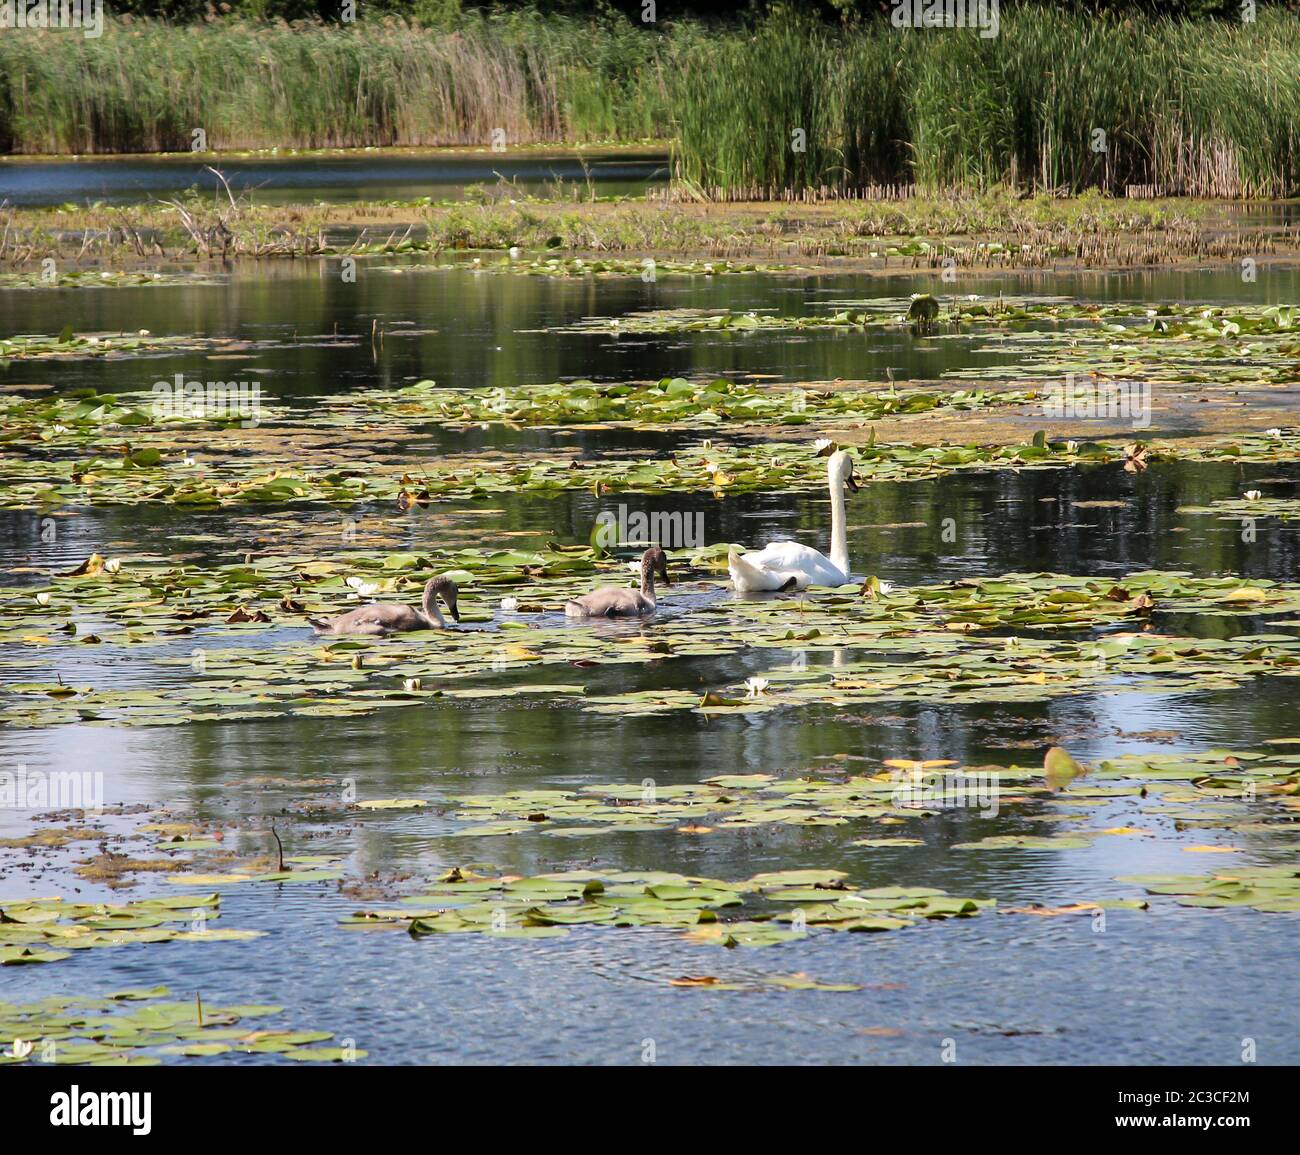 A swan with offspring on a pond. Stock Photo